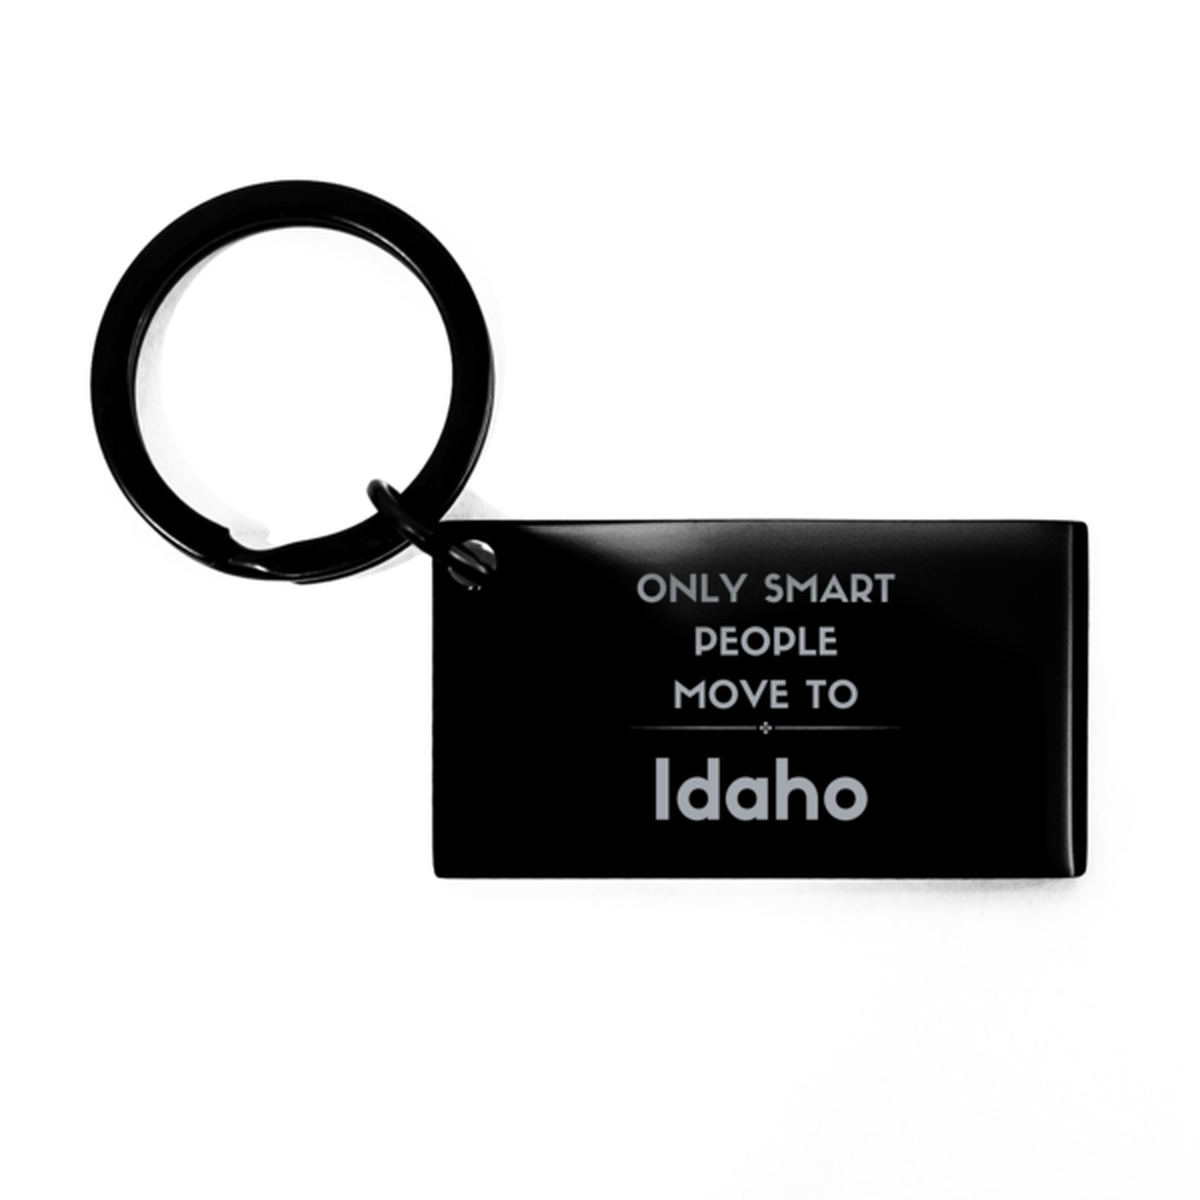 Only smart people move to Idaho Keychain, Gag Gifts For Idaho, Move to Idaho Gifts for Friends Coworker Funny Saying Quote